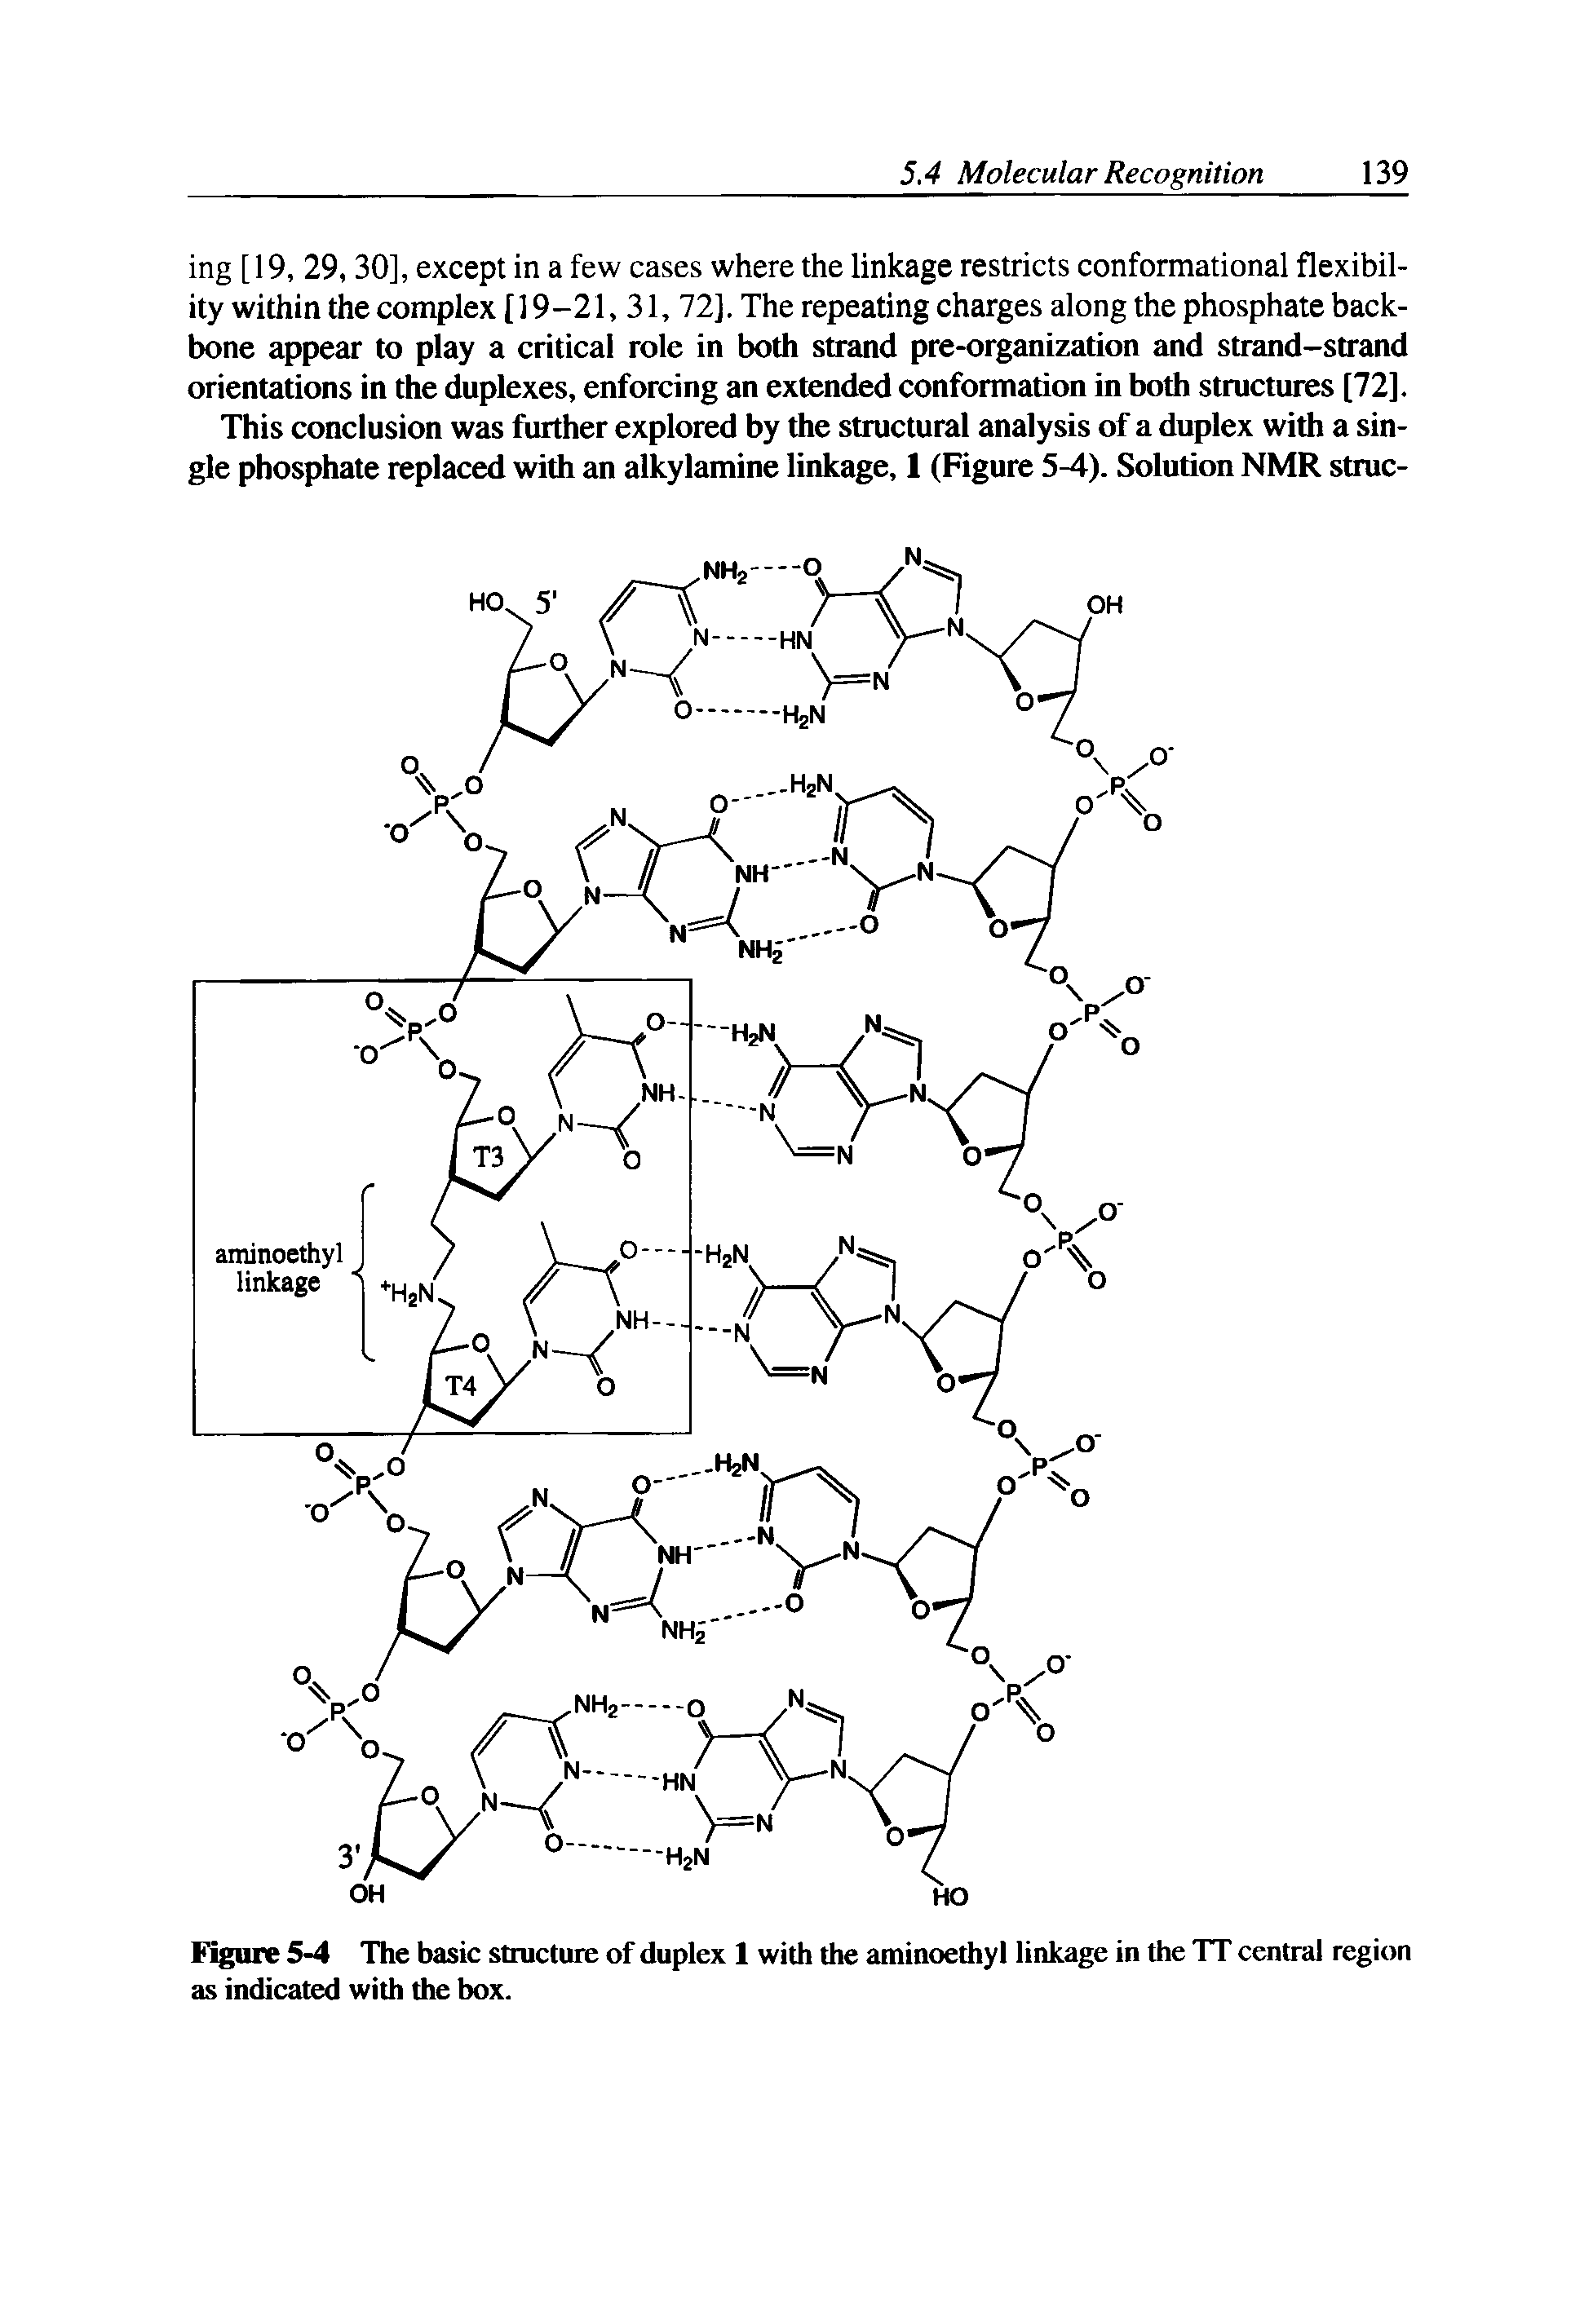 Figure 5-4 The basic structure of duplex 1 with the aminoethyl linkage in the TT central region as indicated with the box.